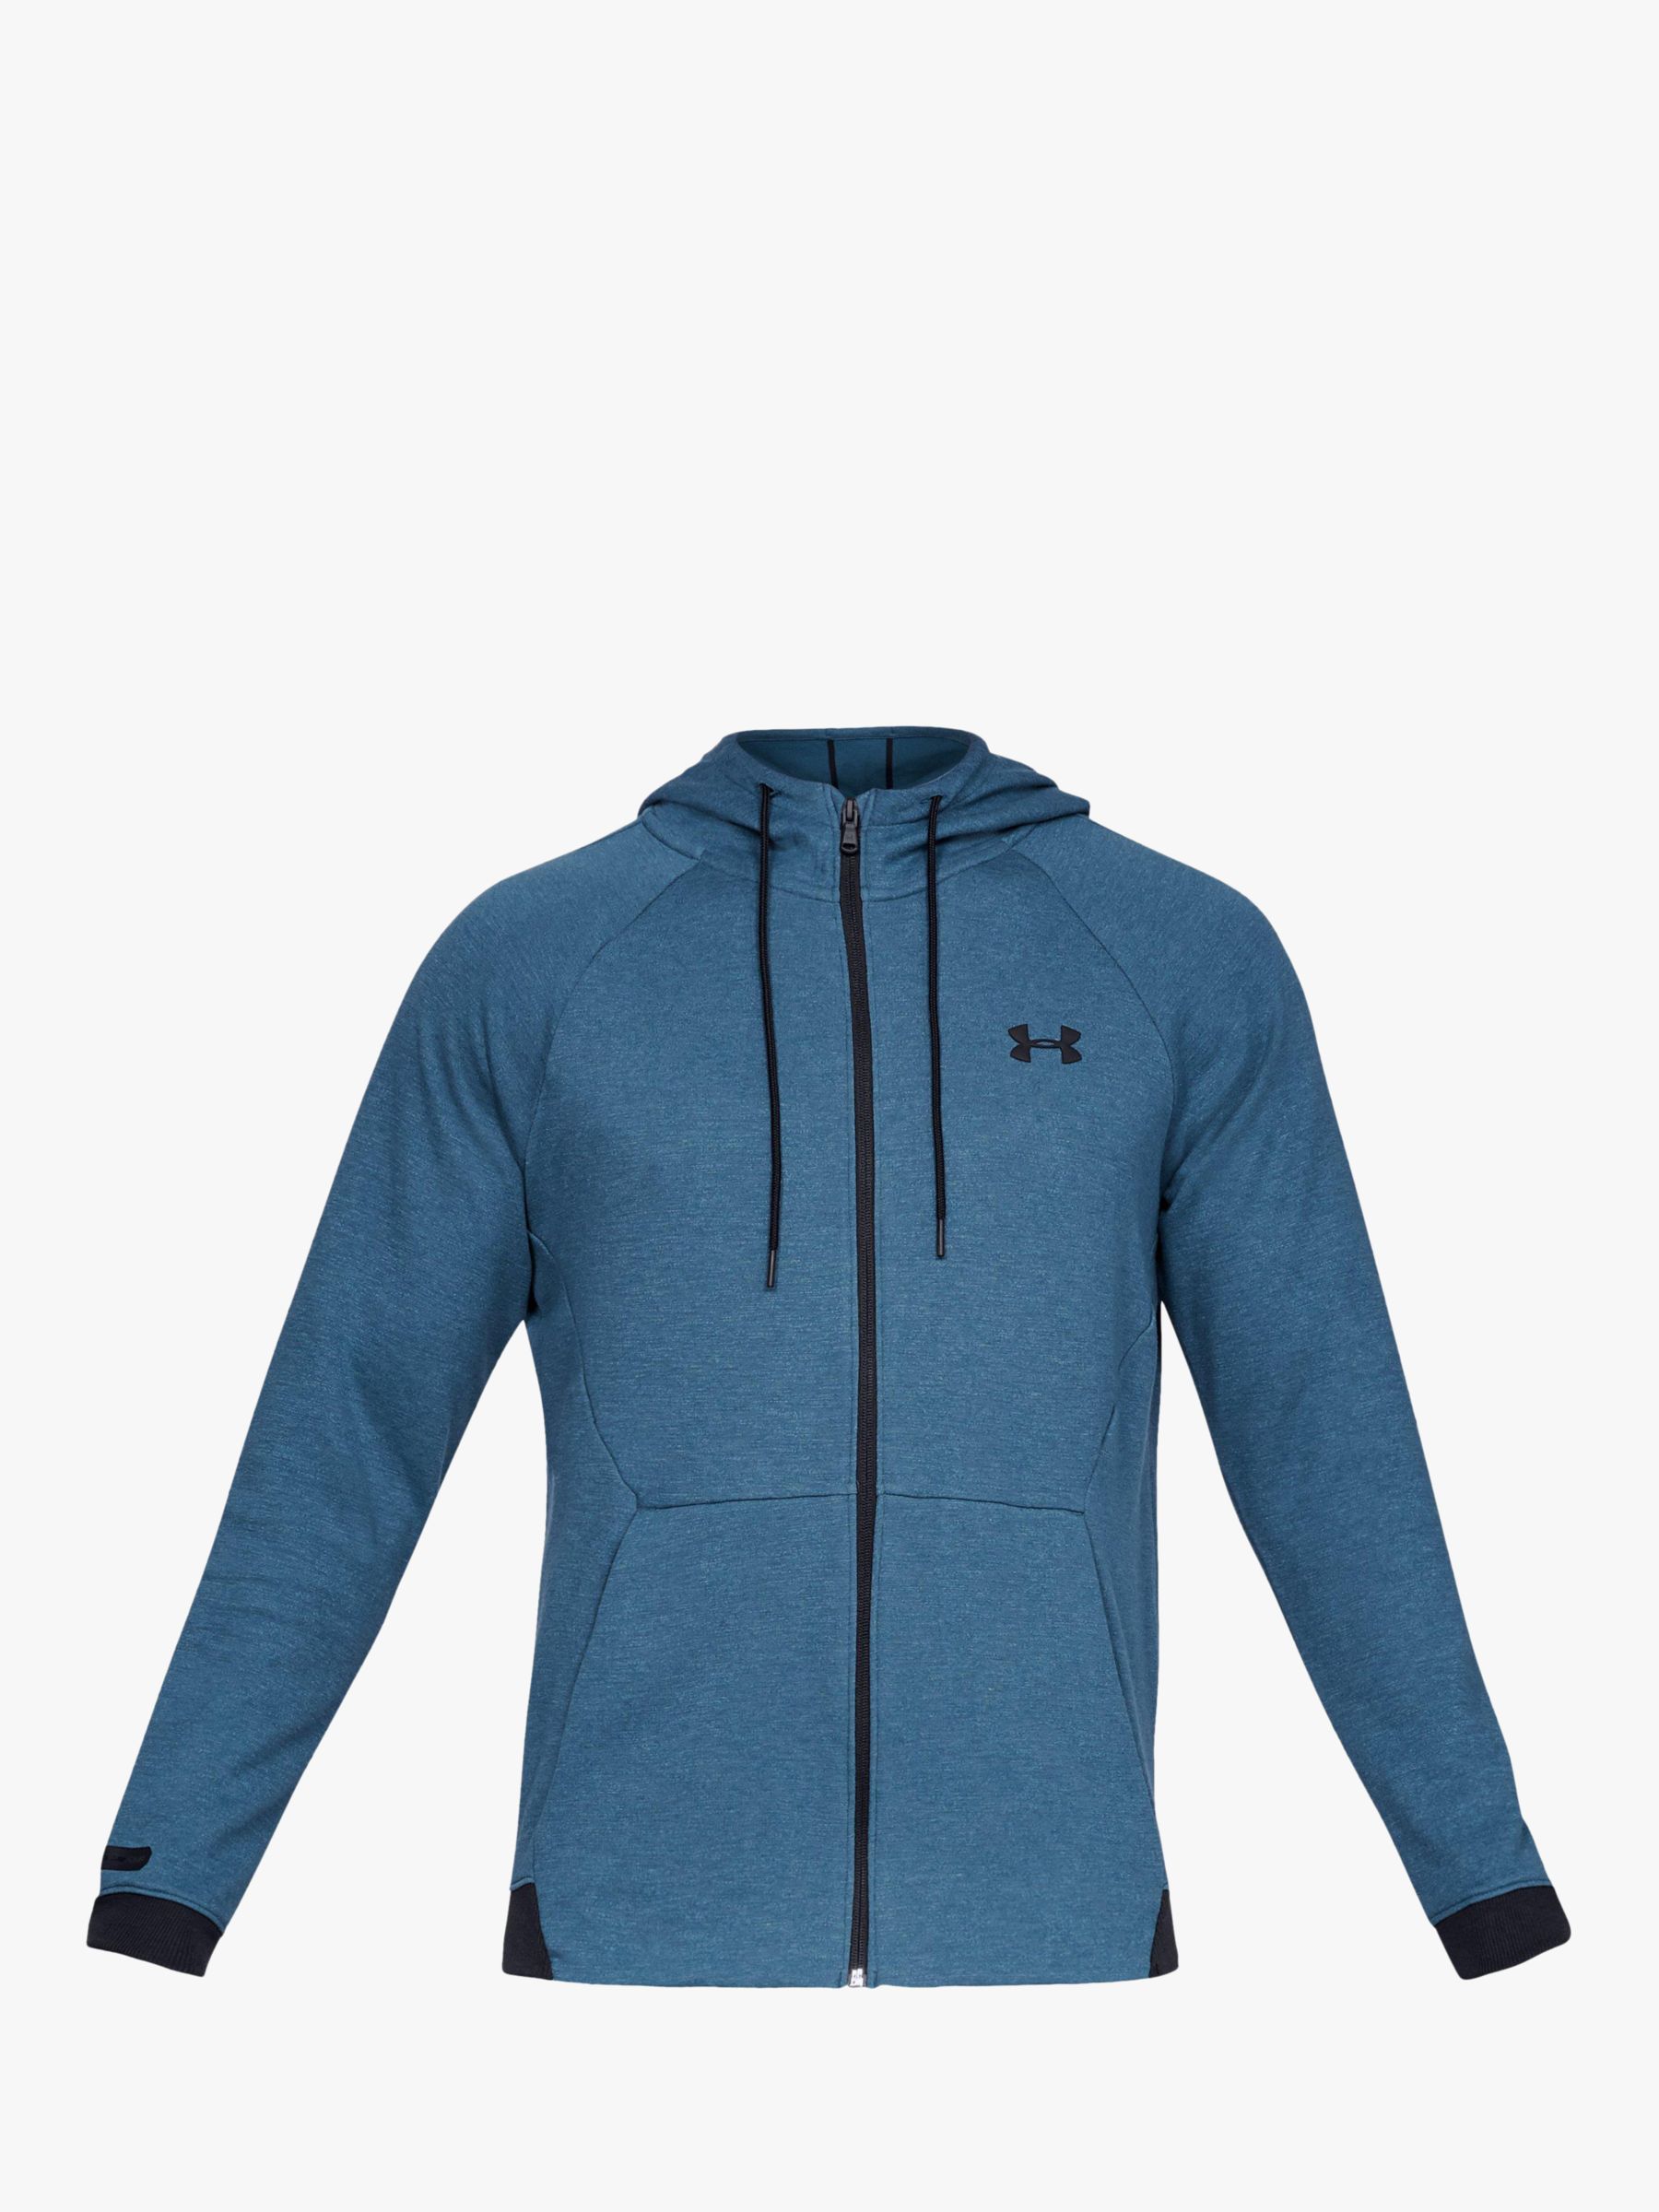 ua unstoppable double knit full zip